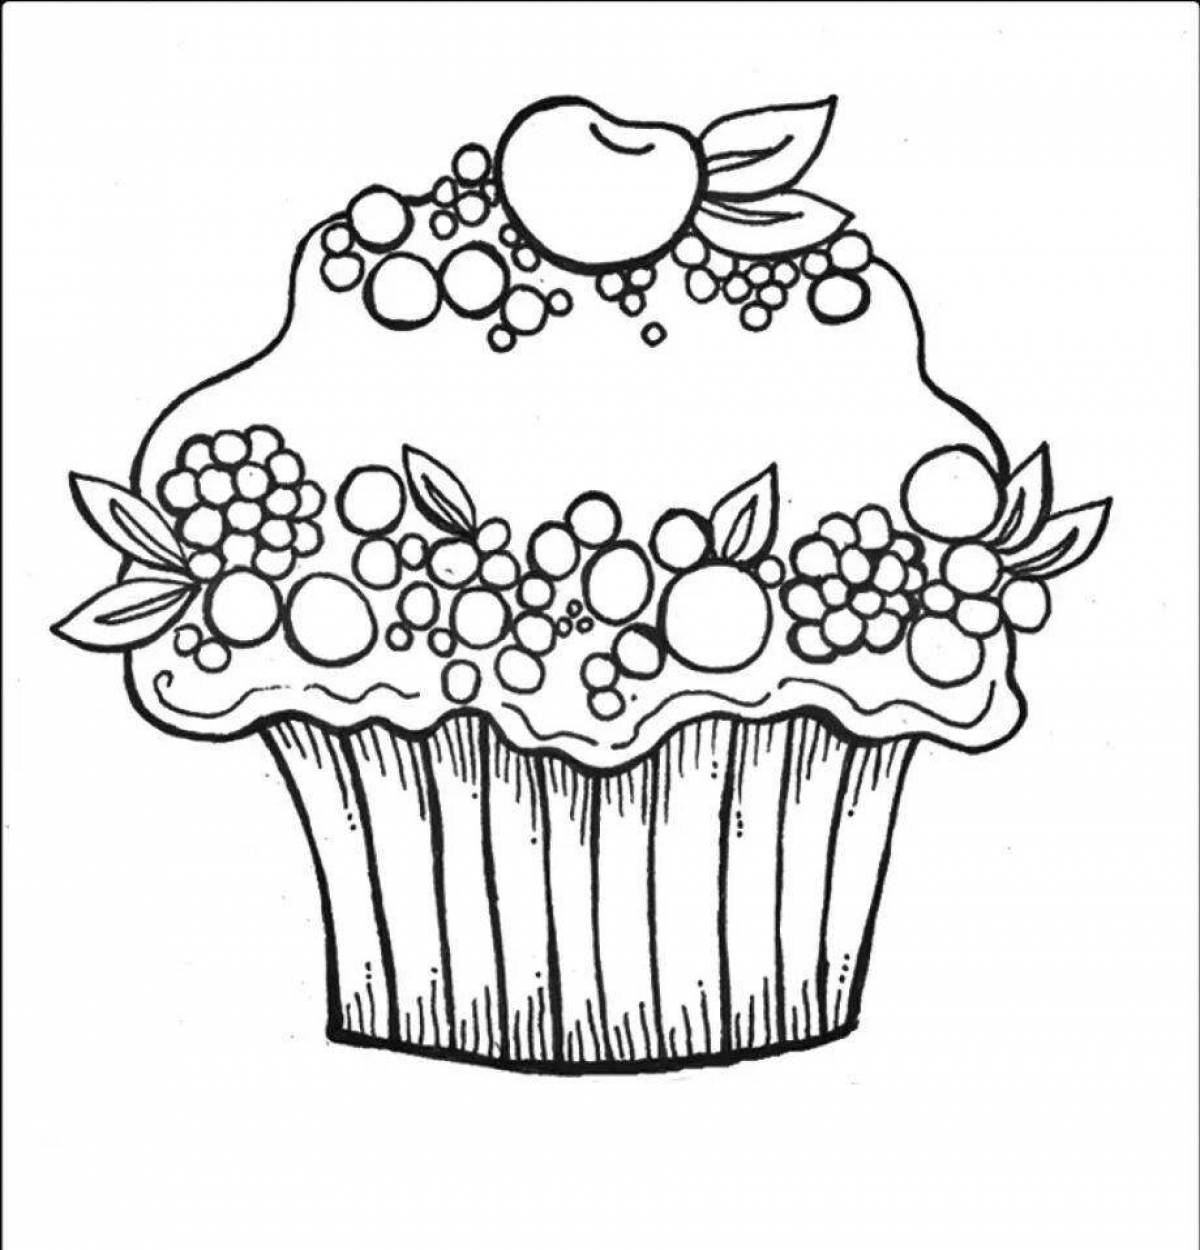 Merry cupcake coloring for kids